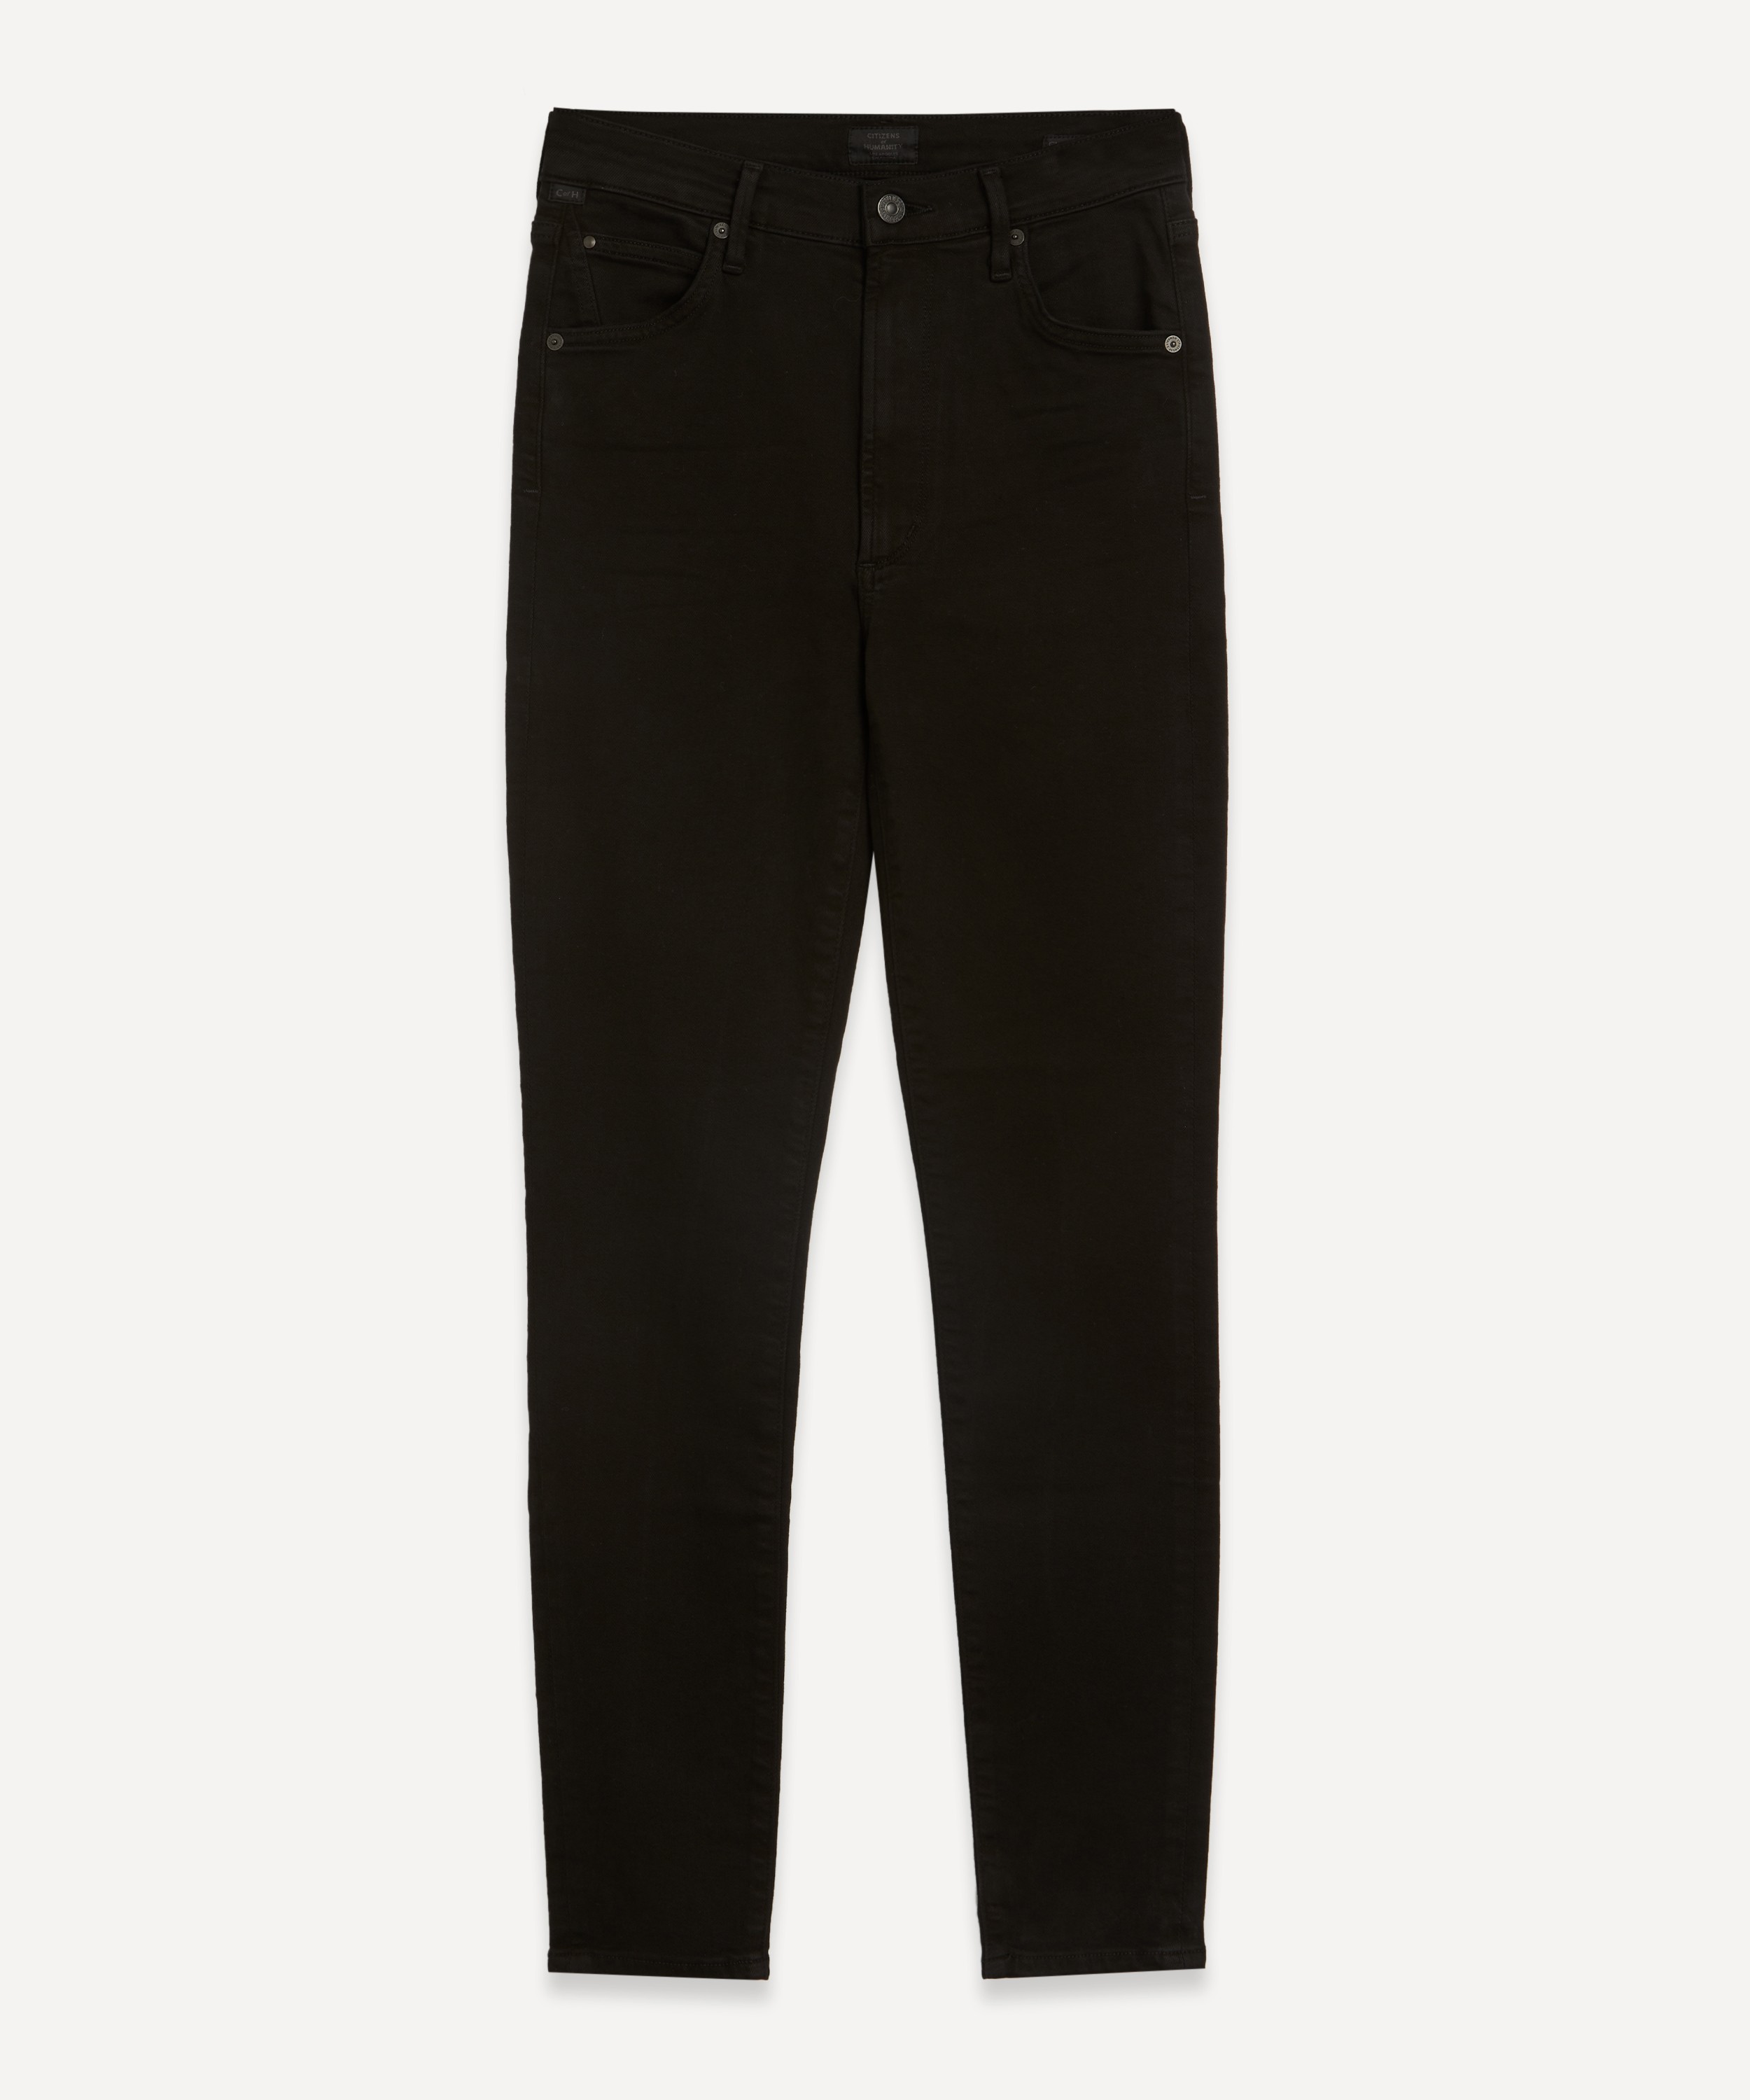 Citizens of Humanity - Chrissy High Rise Skinny Jeans